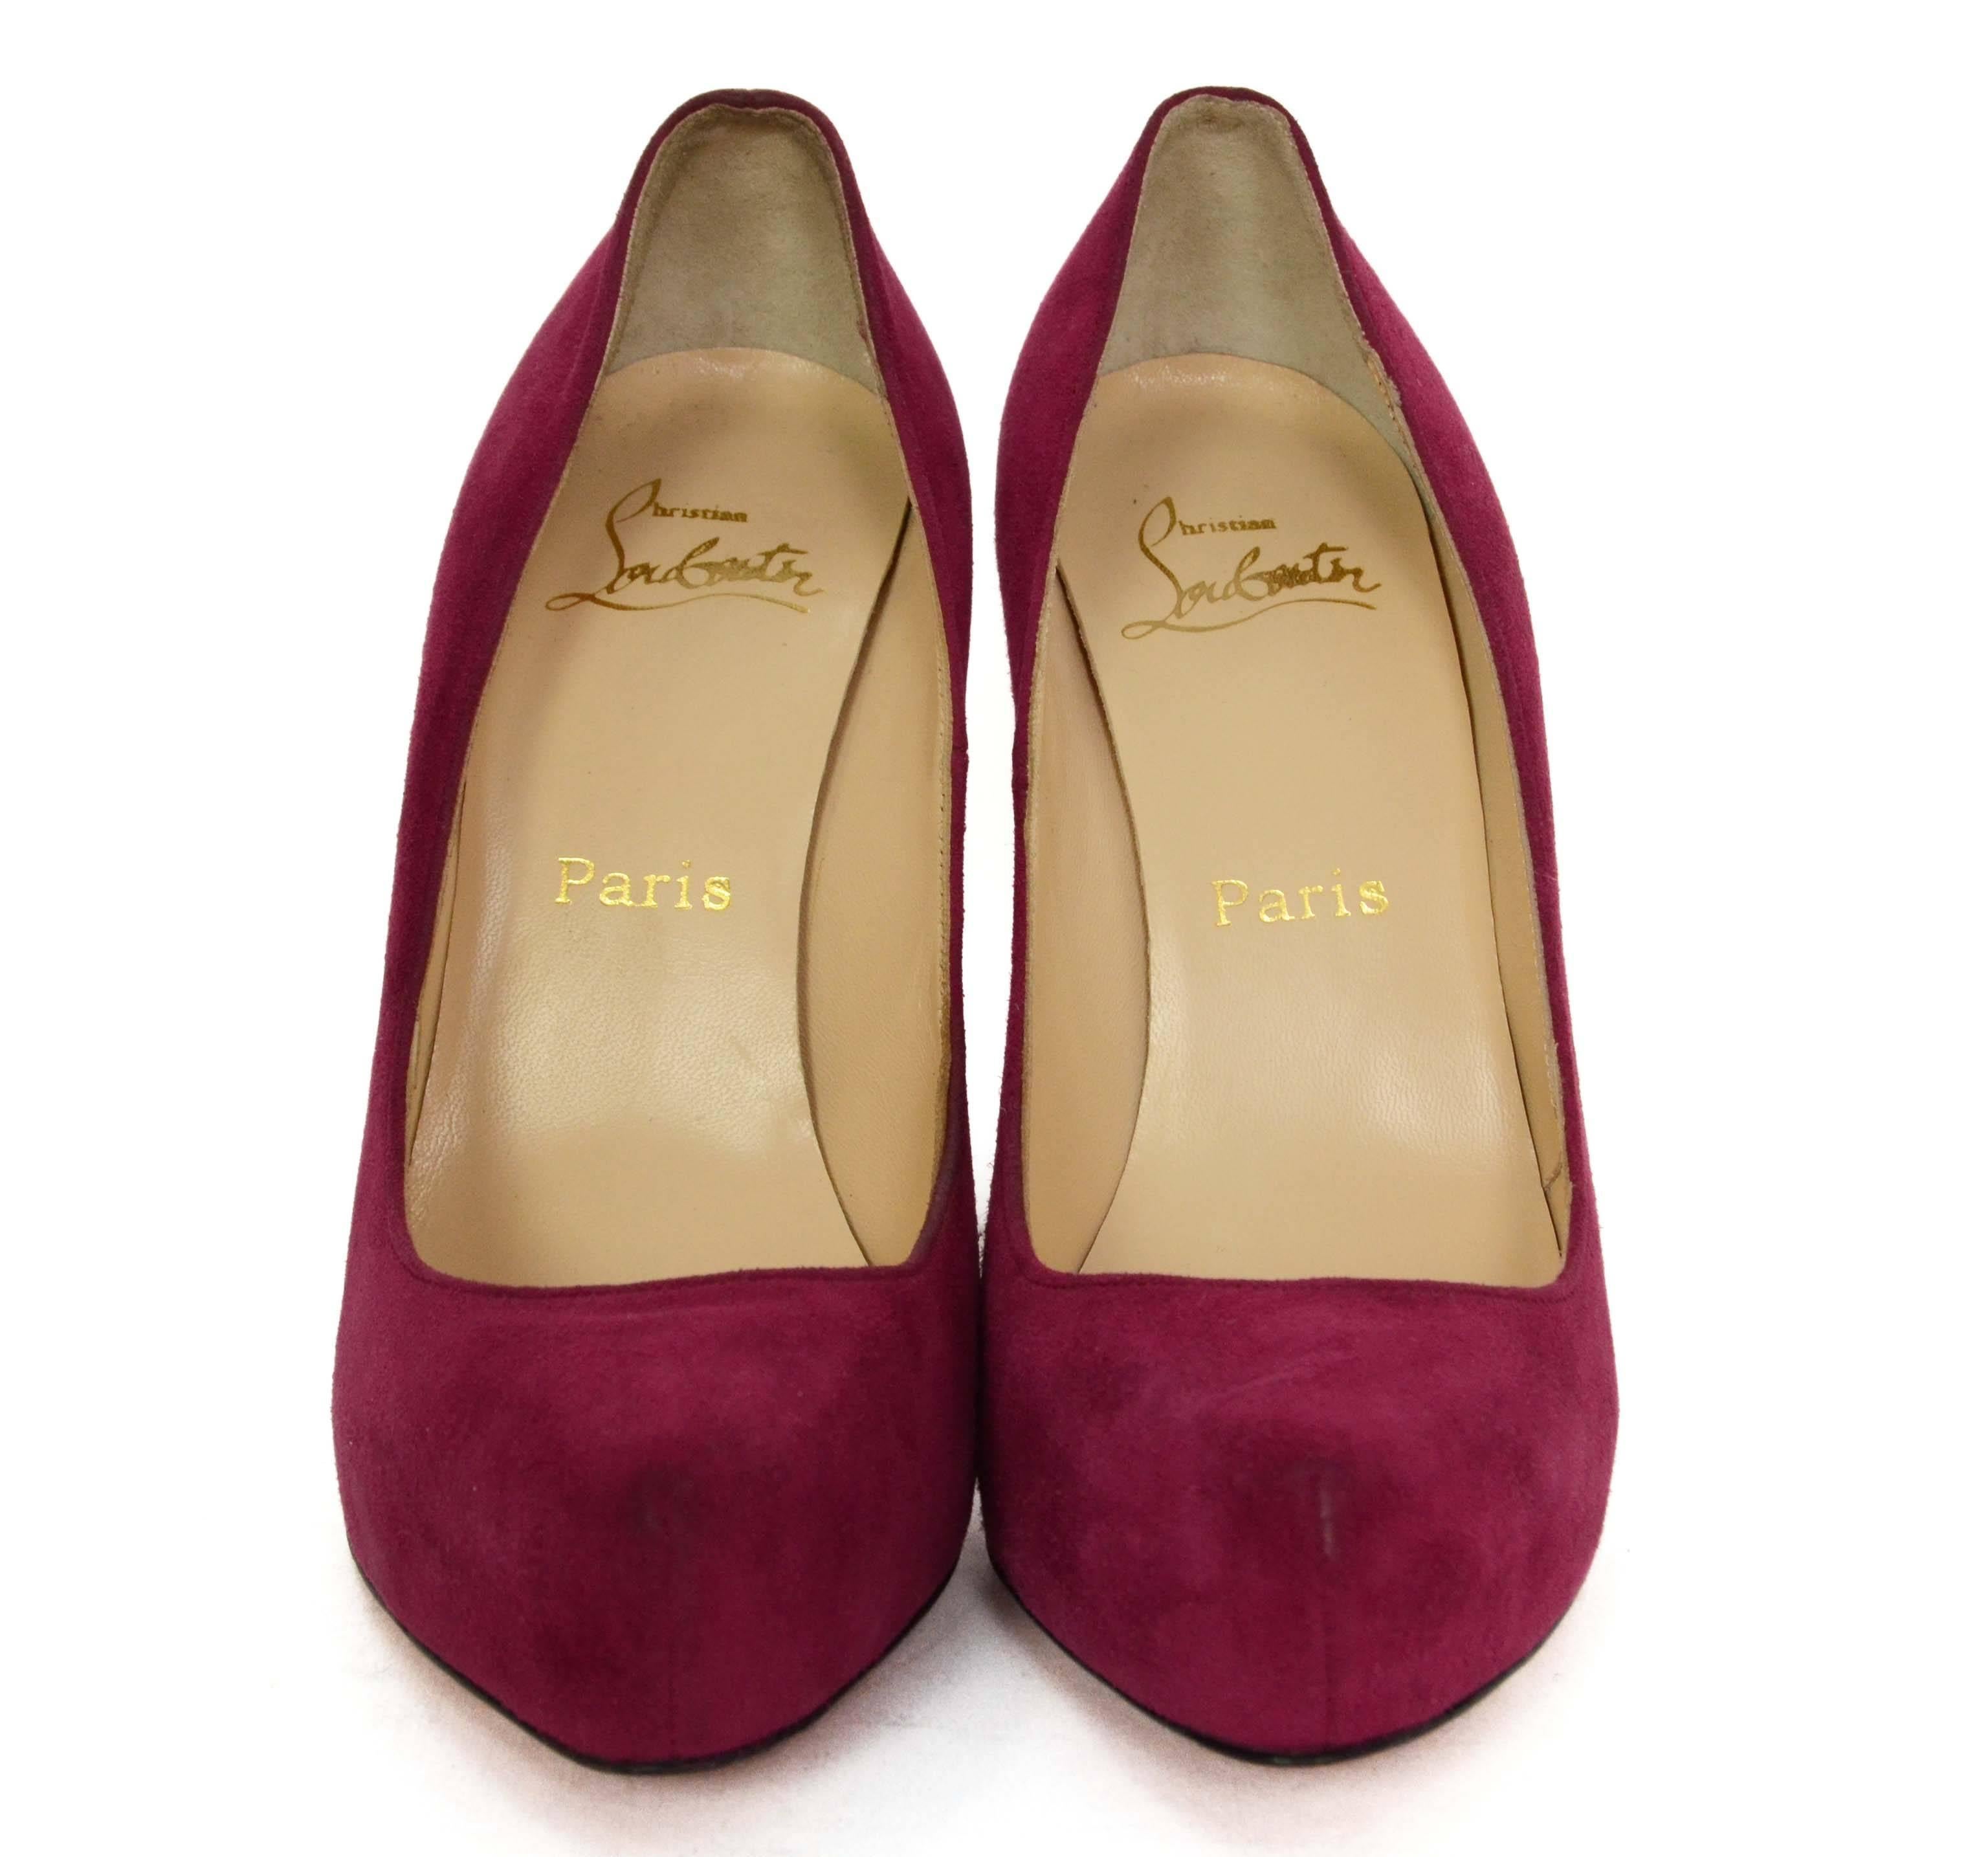 Features almond shaped toe

-Made in: italy
-Color: Magenta
-Composition: Suede
-Sole Stamp: Chrsitian Louboutin MADE IN ITALY
-Closure/opening: Slip in
-Overall Condition: Excellent with light soiling and wear to the frot tips of the toes